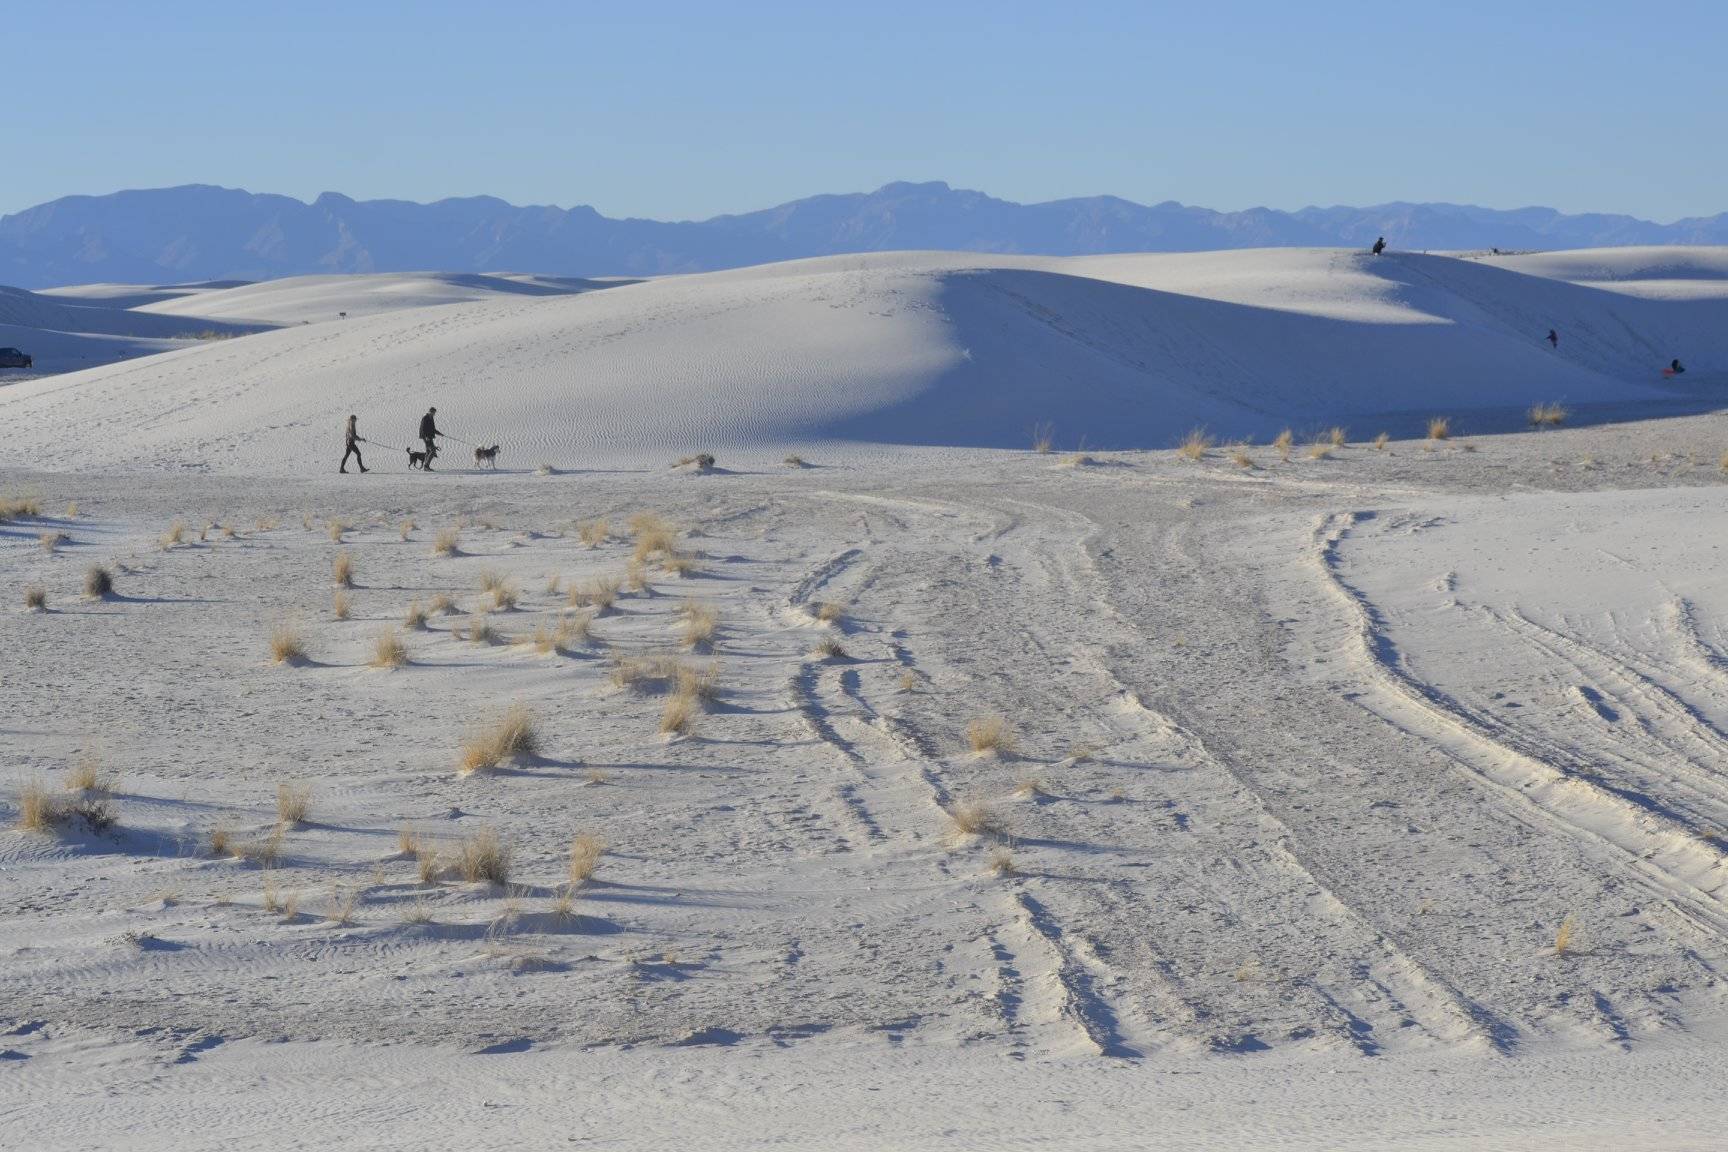 White Sands National Monument in New Mexico could almost be mistaken for a snowy hillside. (Photo by Victoria Petersen/Peninsula Clarion)